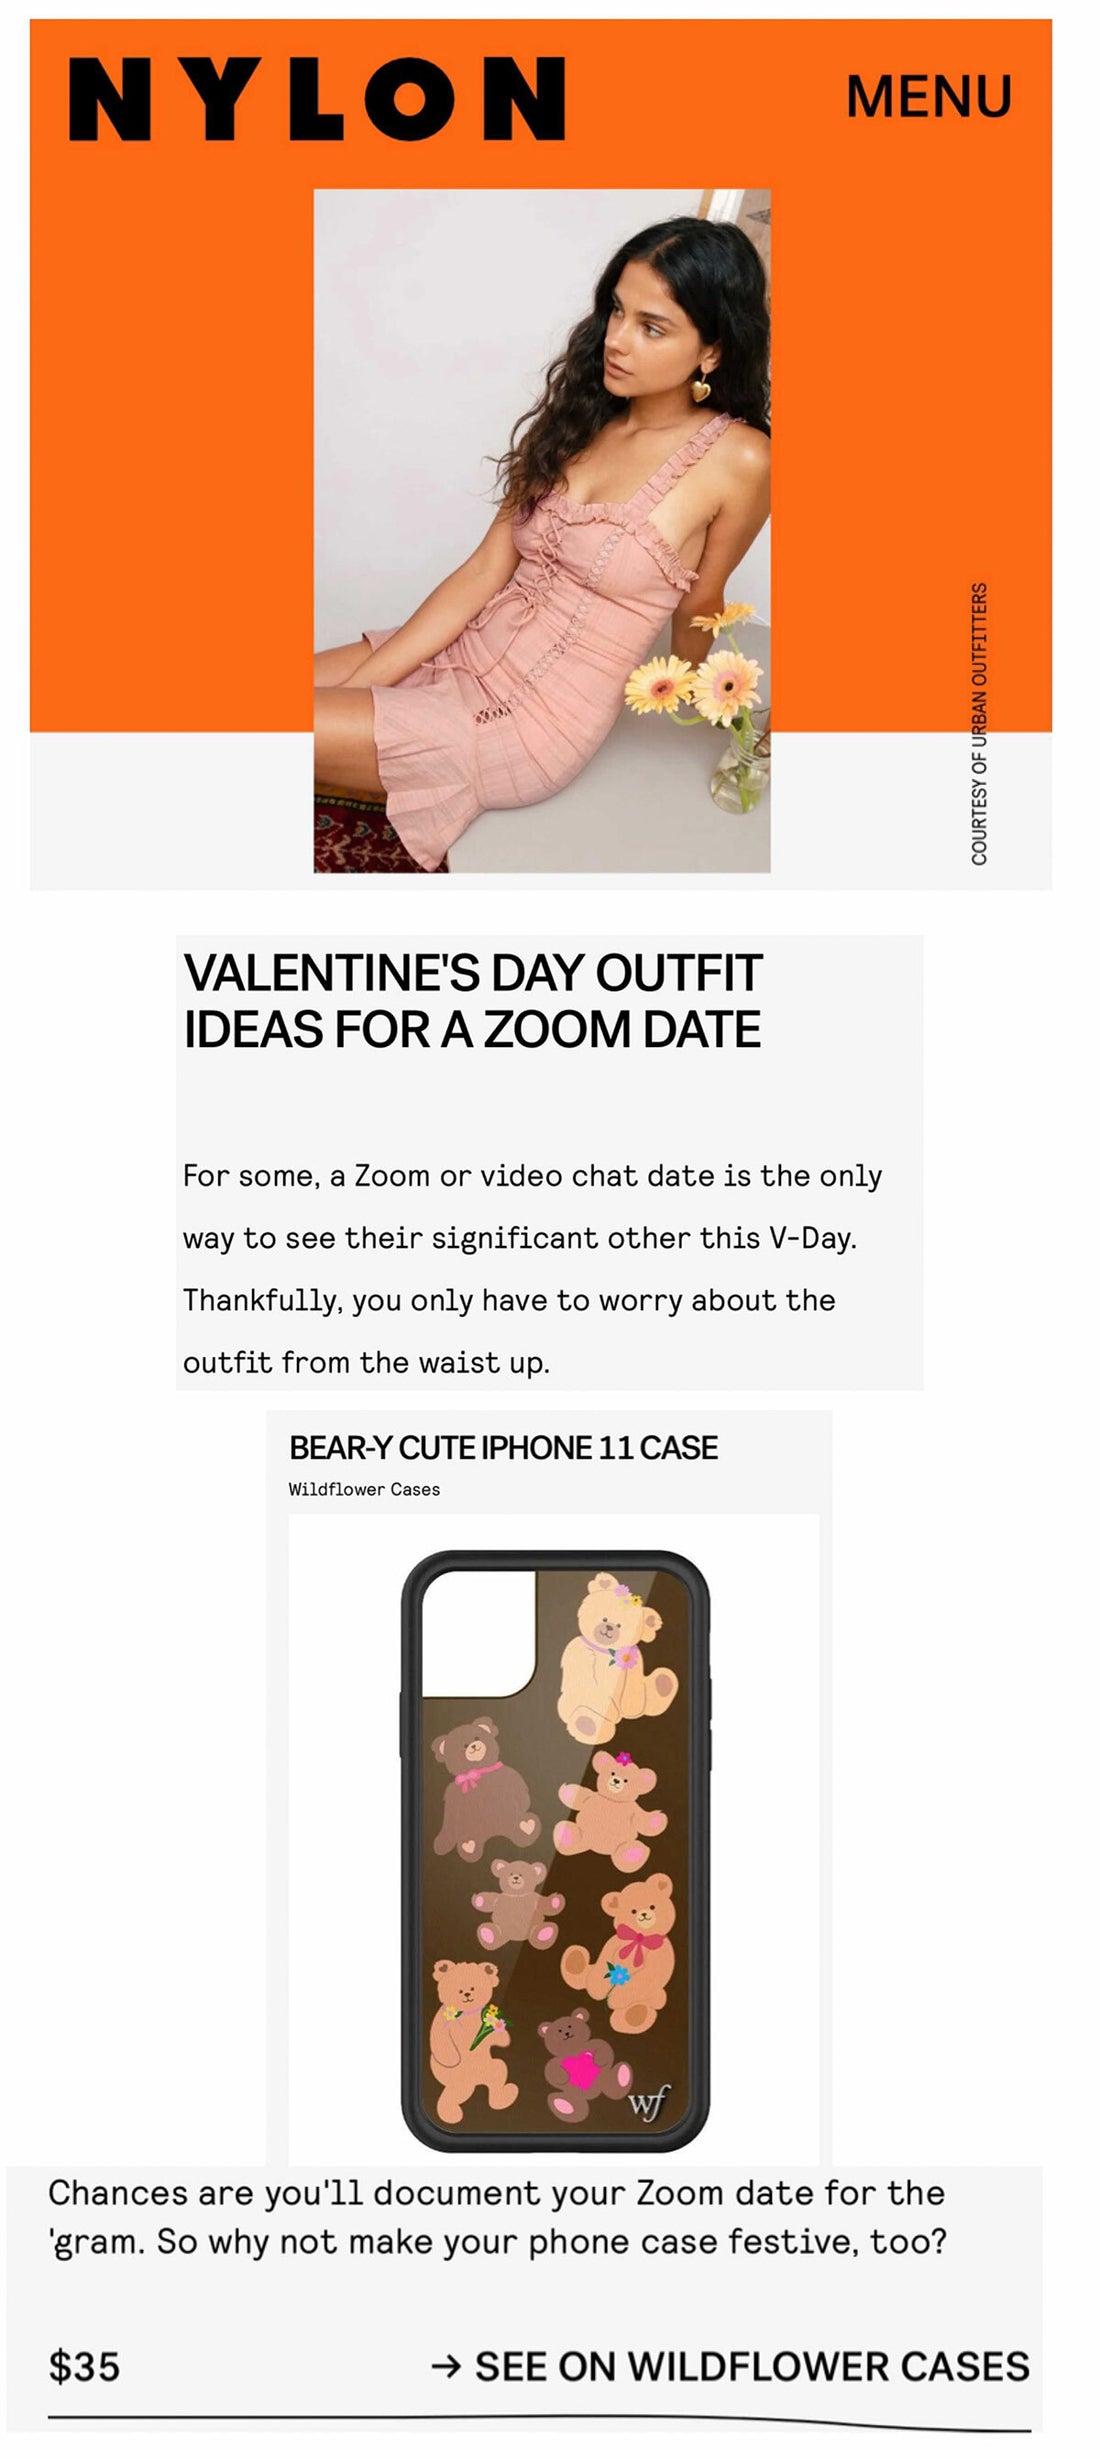 17 OUTFIT IDEAS FOR YOUR VALENTINE'S DAY PLANS, FROM A CHILL NIGHT IN TO ZOOM DATES